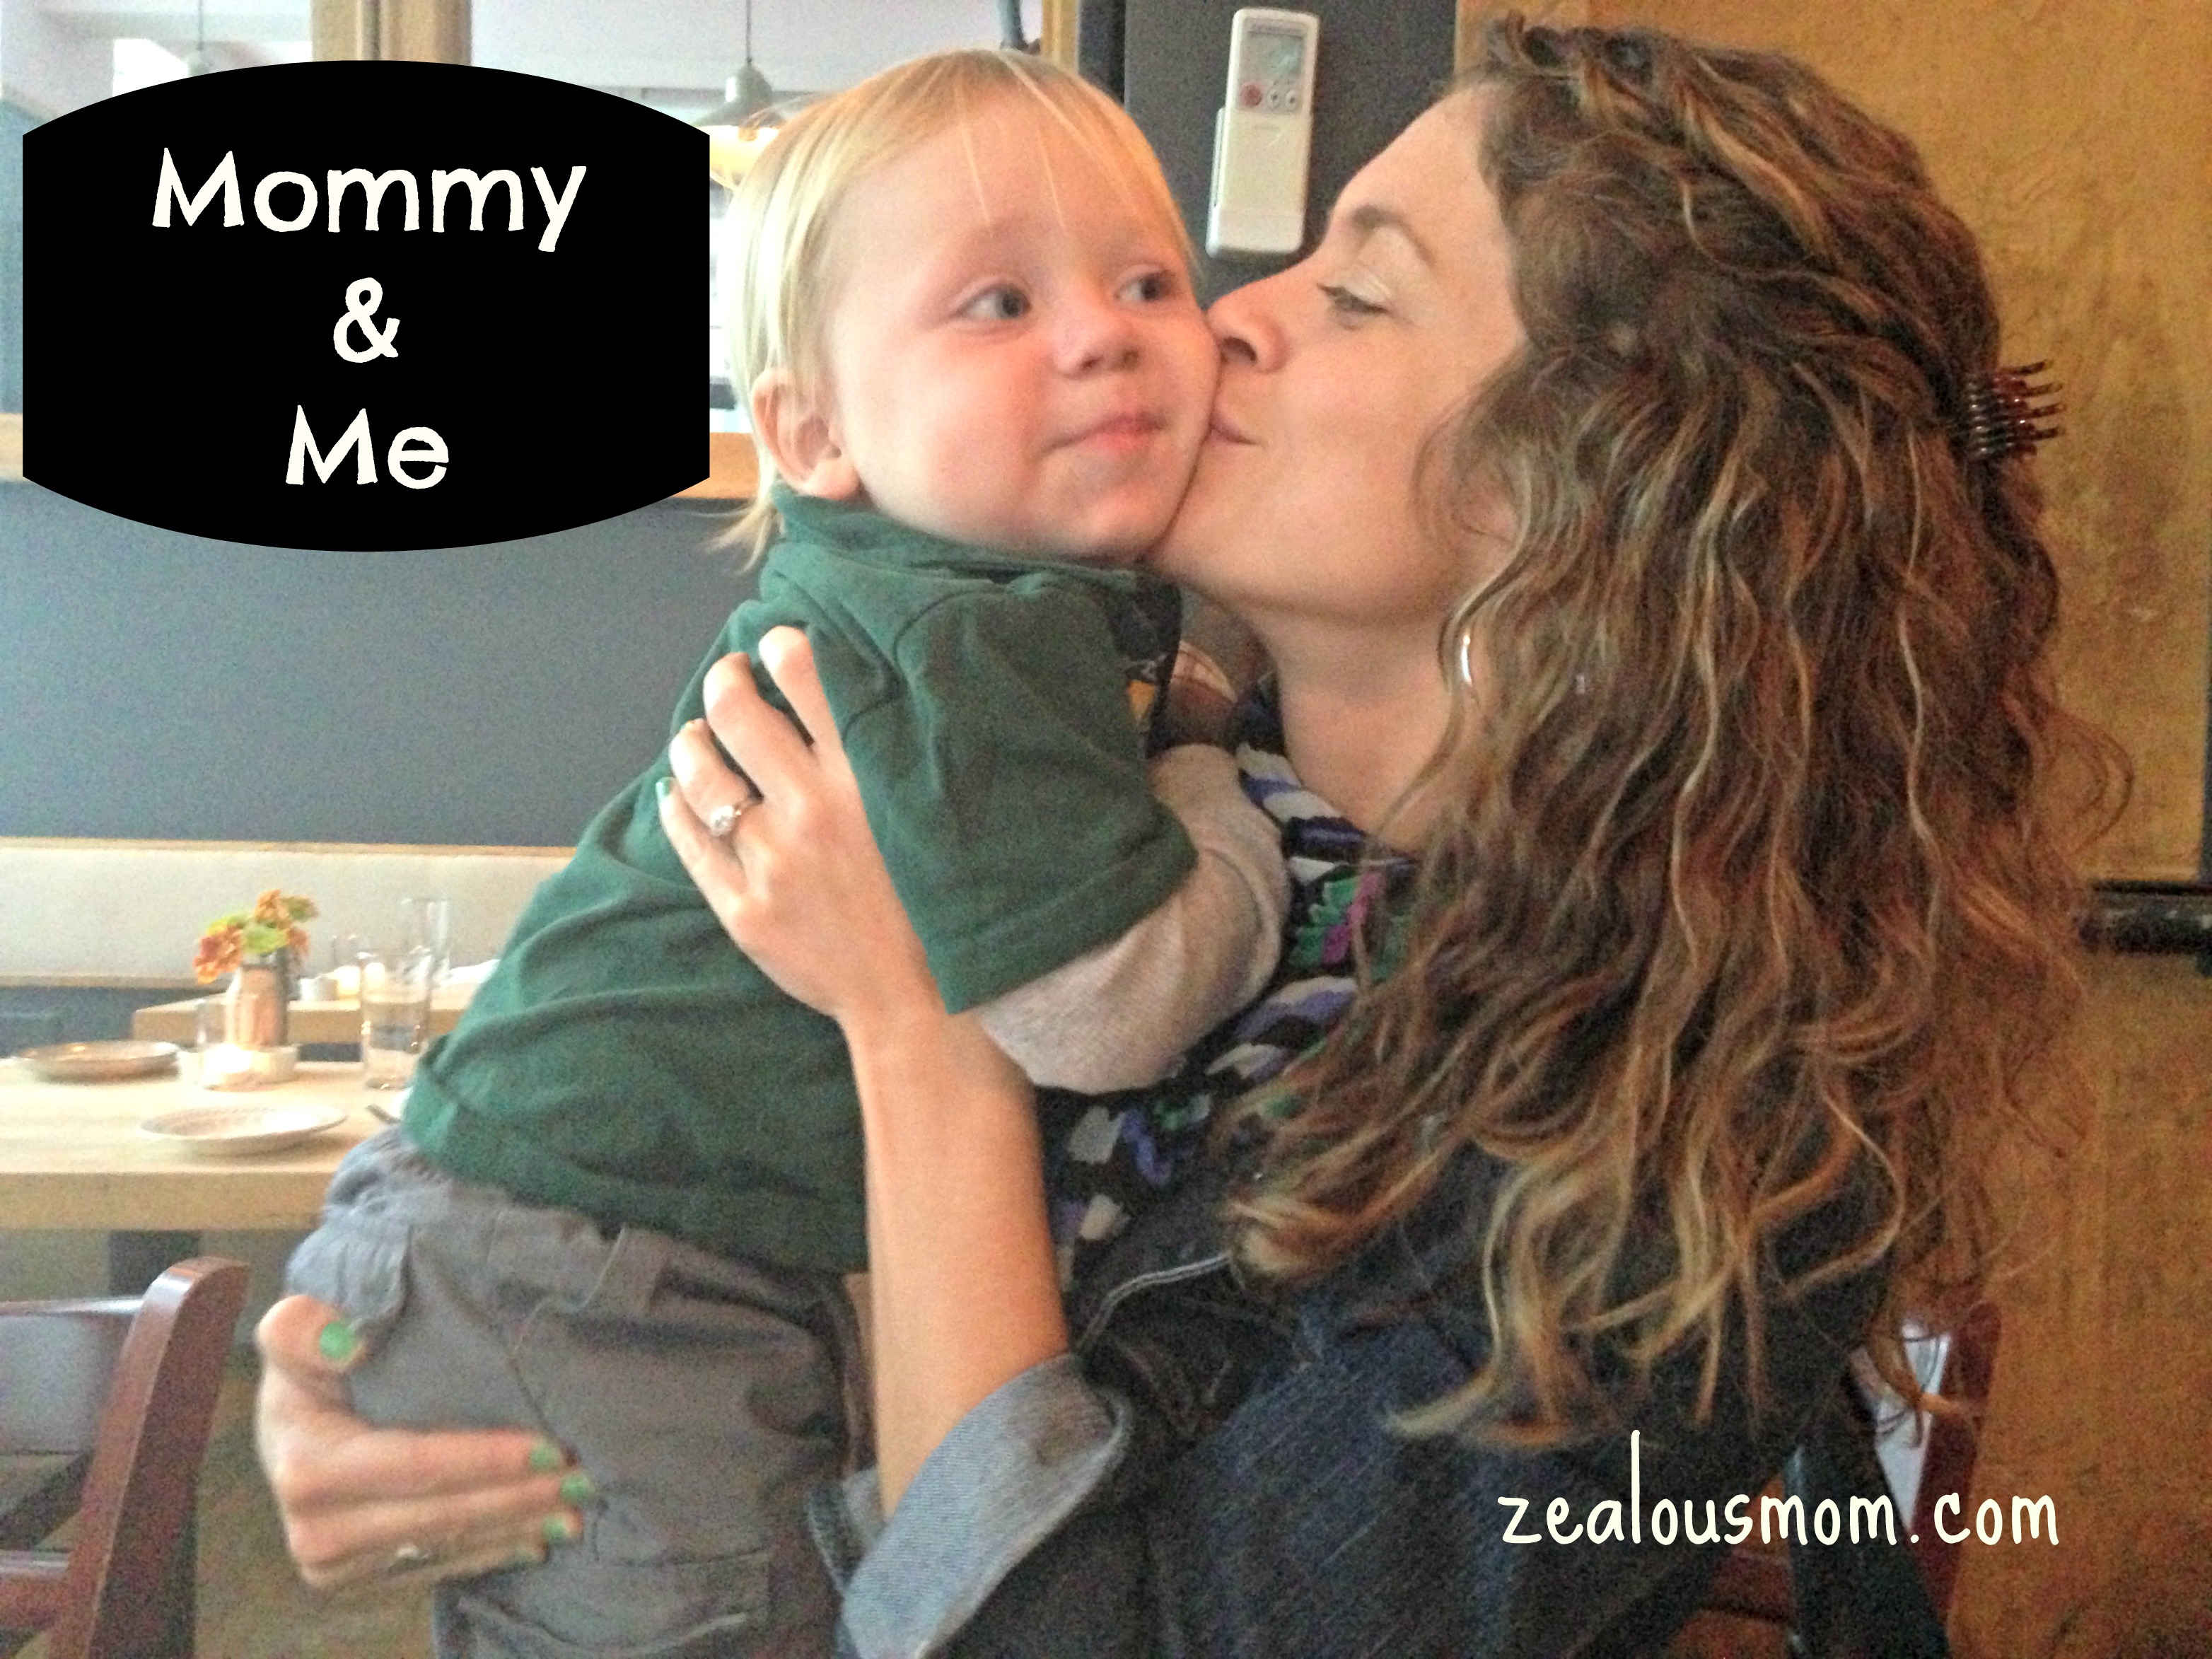 “Mommy, Mama, Mum, Mommy…”: Mommy & Me, 6th Ed.